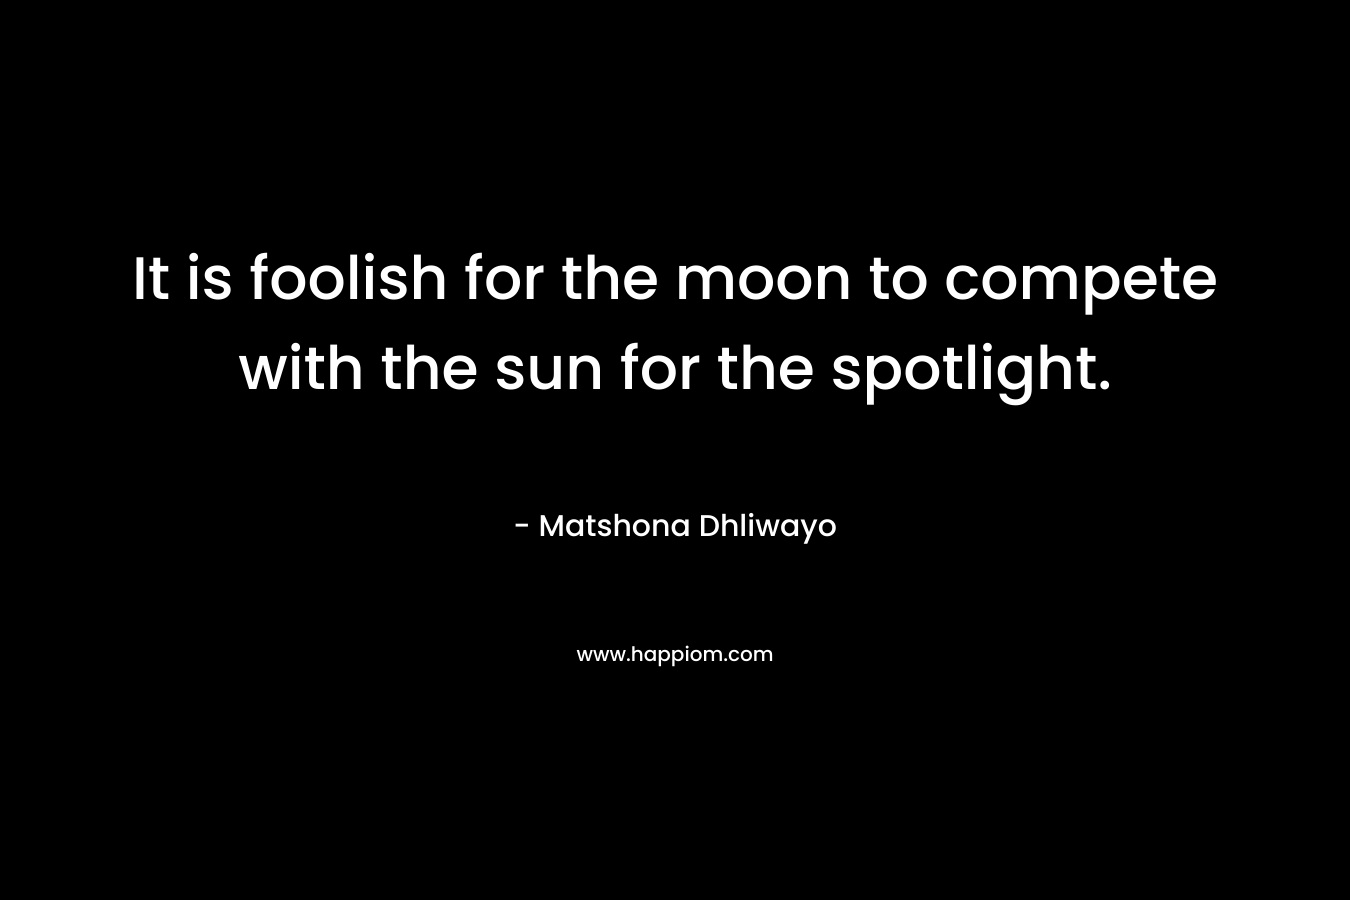 It is foolish for the moon to compete with the sun for the spotlight.